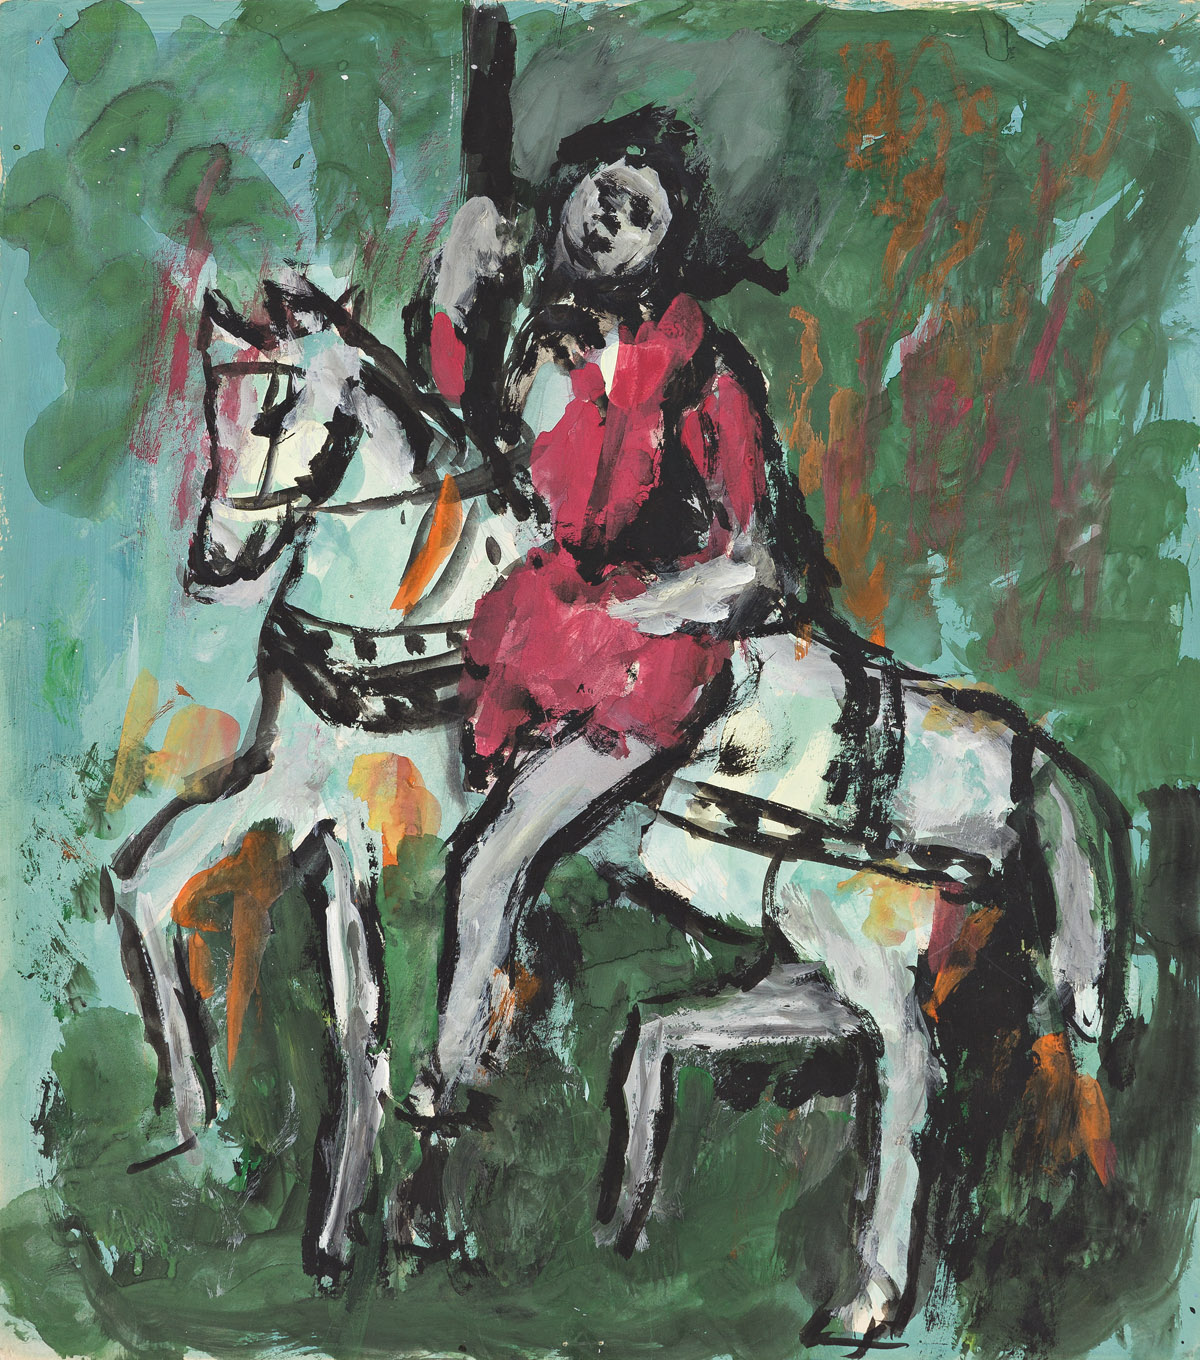 Carousel. Composition of a person riding a carousel in white and red and outlined in black. Background in shades of green. Rendered in oil with gouache on wove paper, by Alma Thomas.